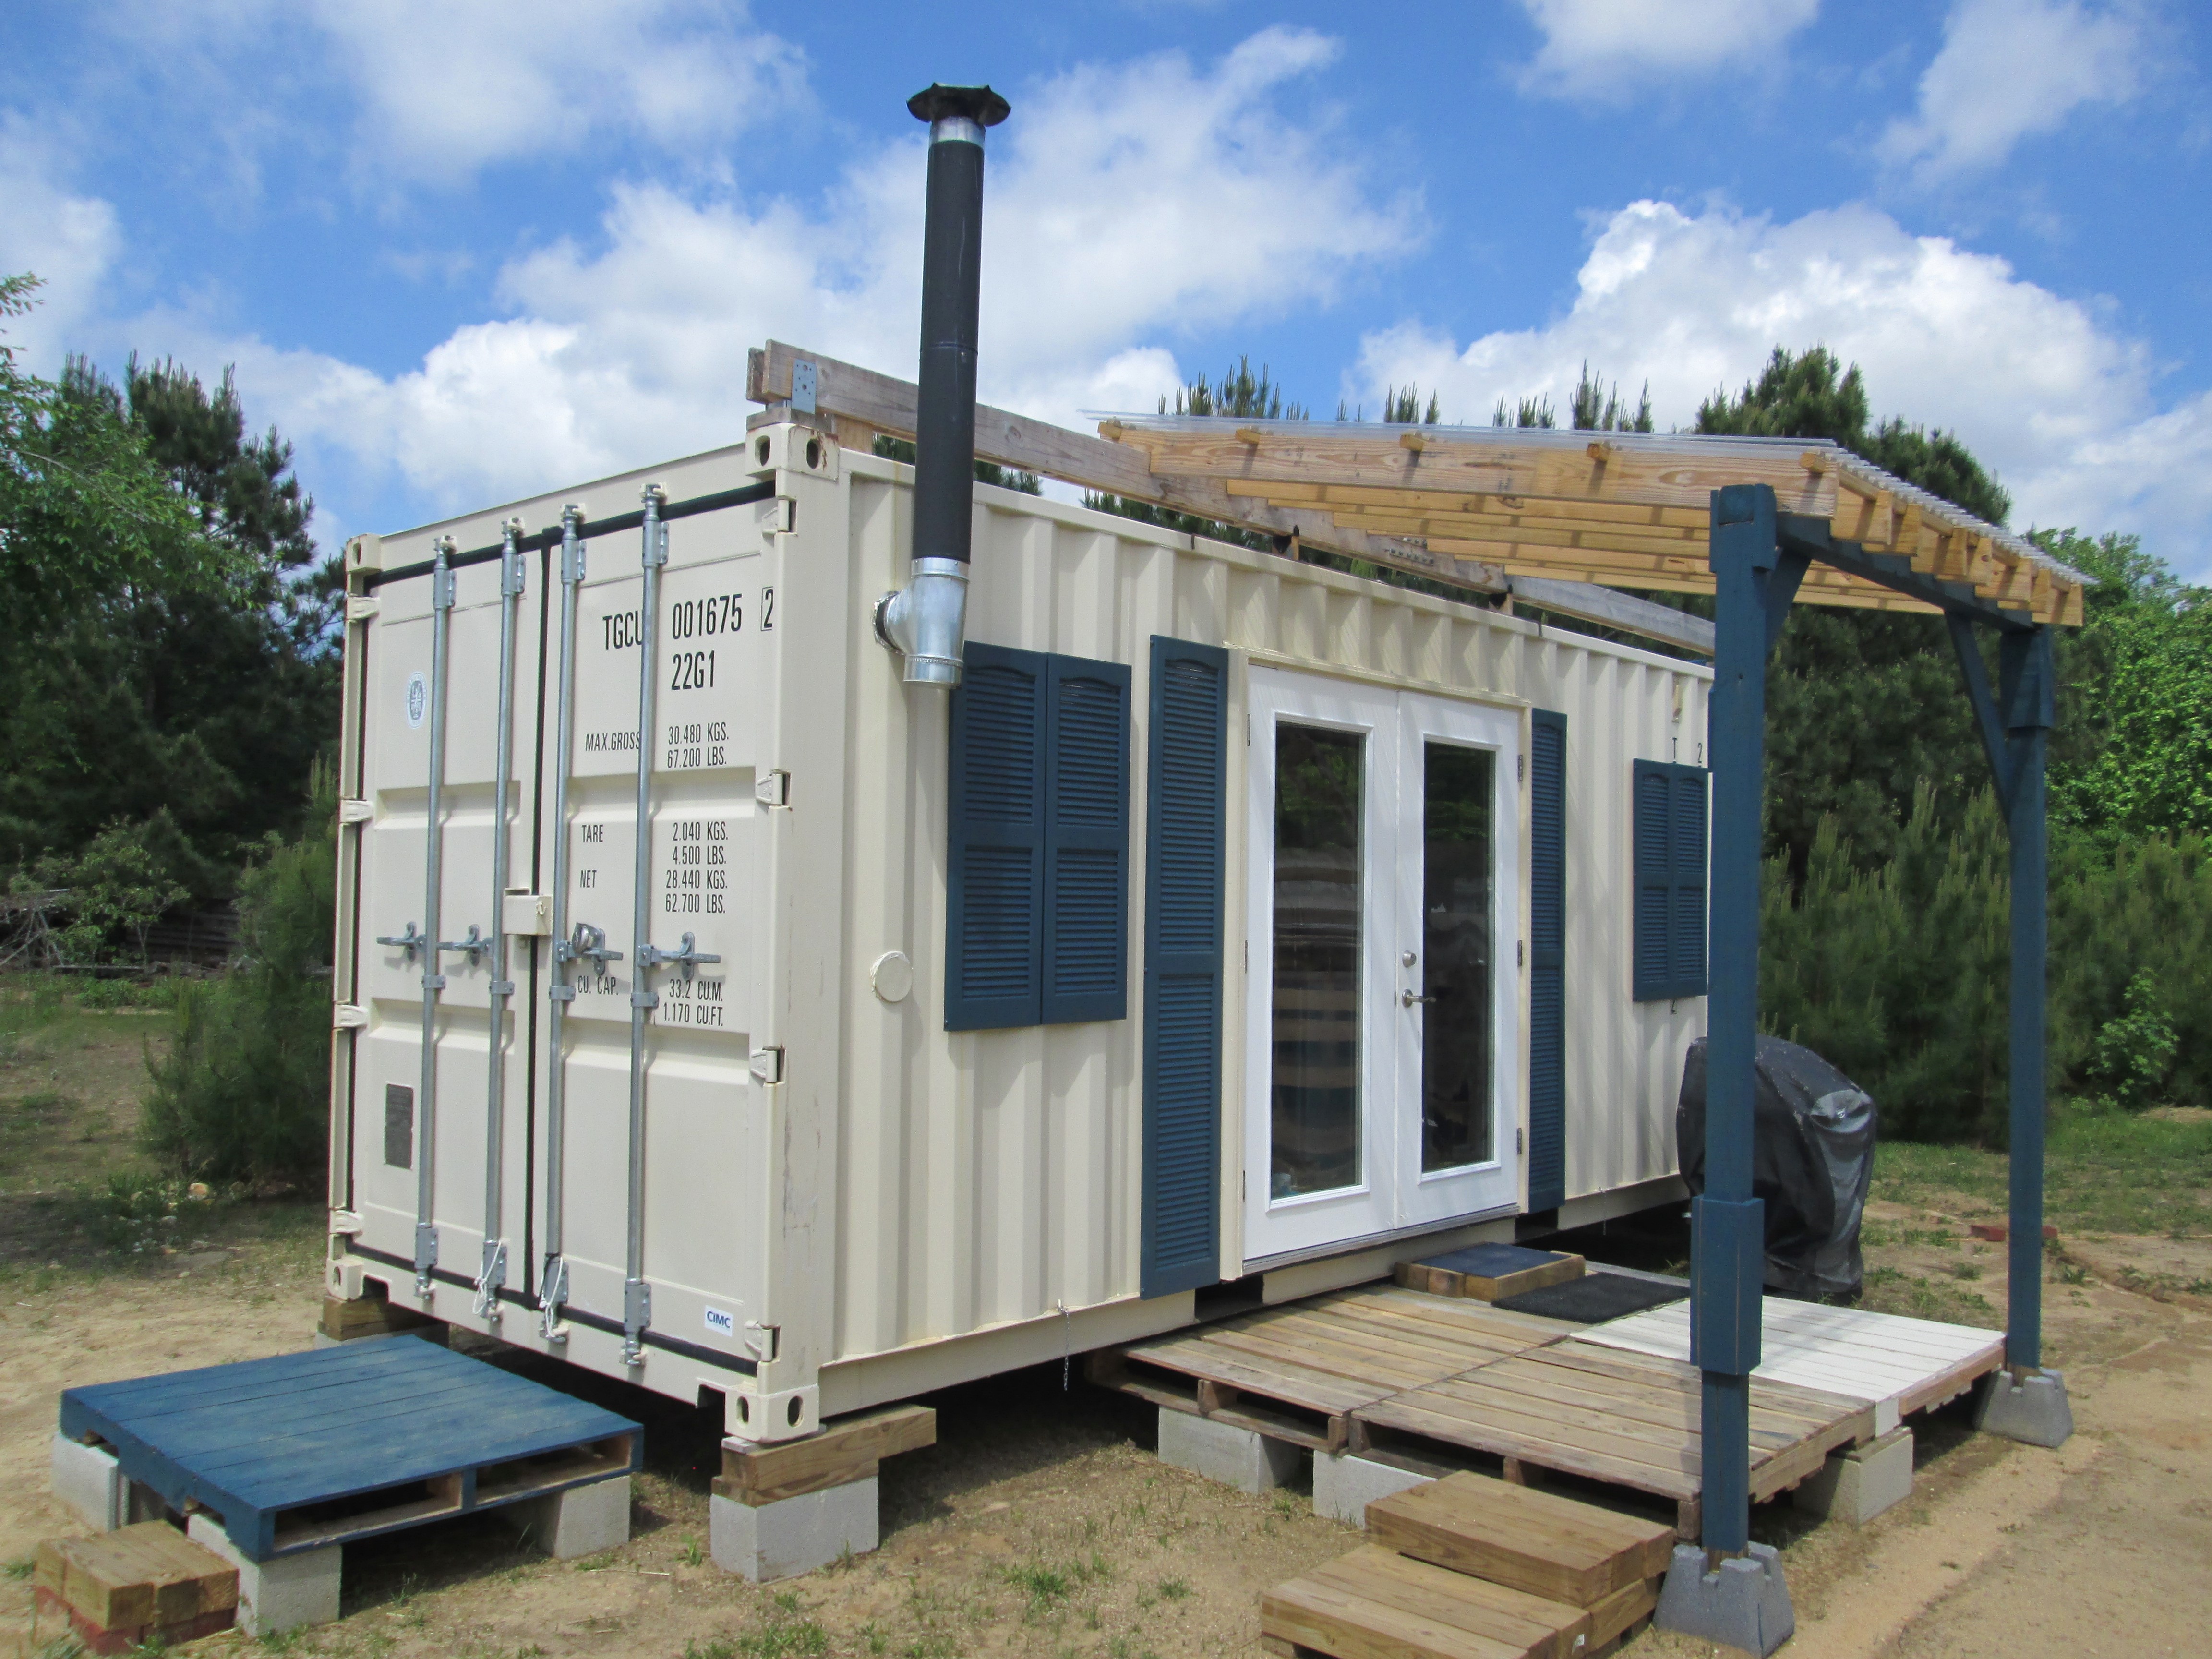 What is the best setup for a tiny house shipping container: On a trailer or on a foundation?